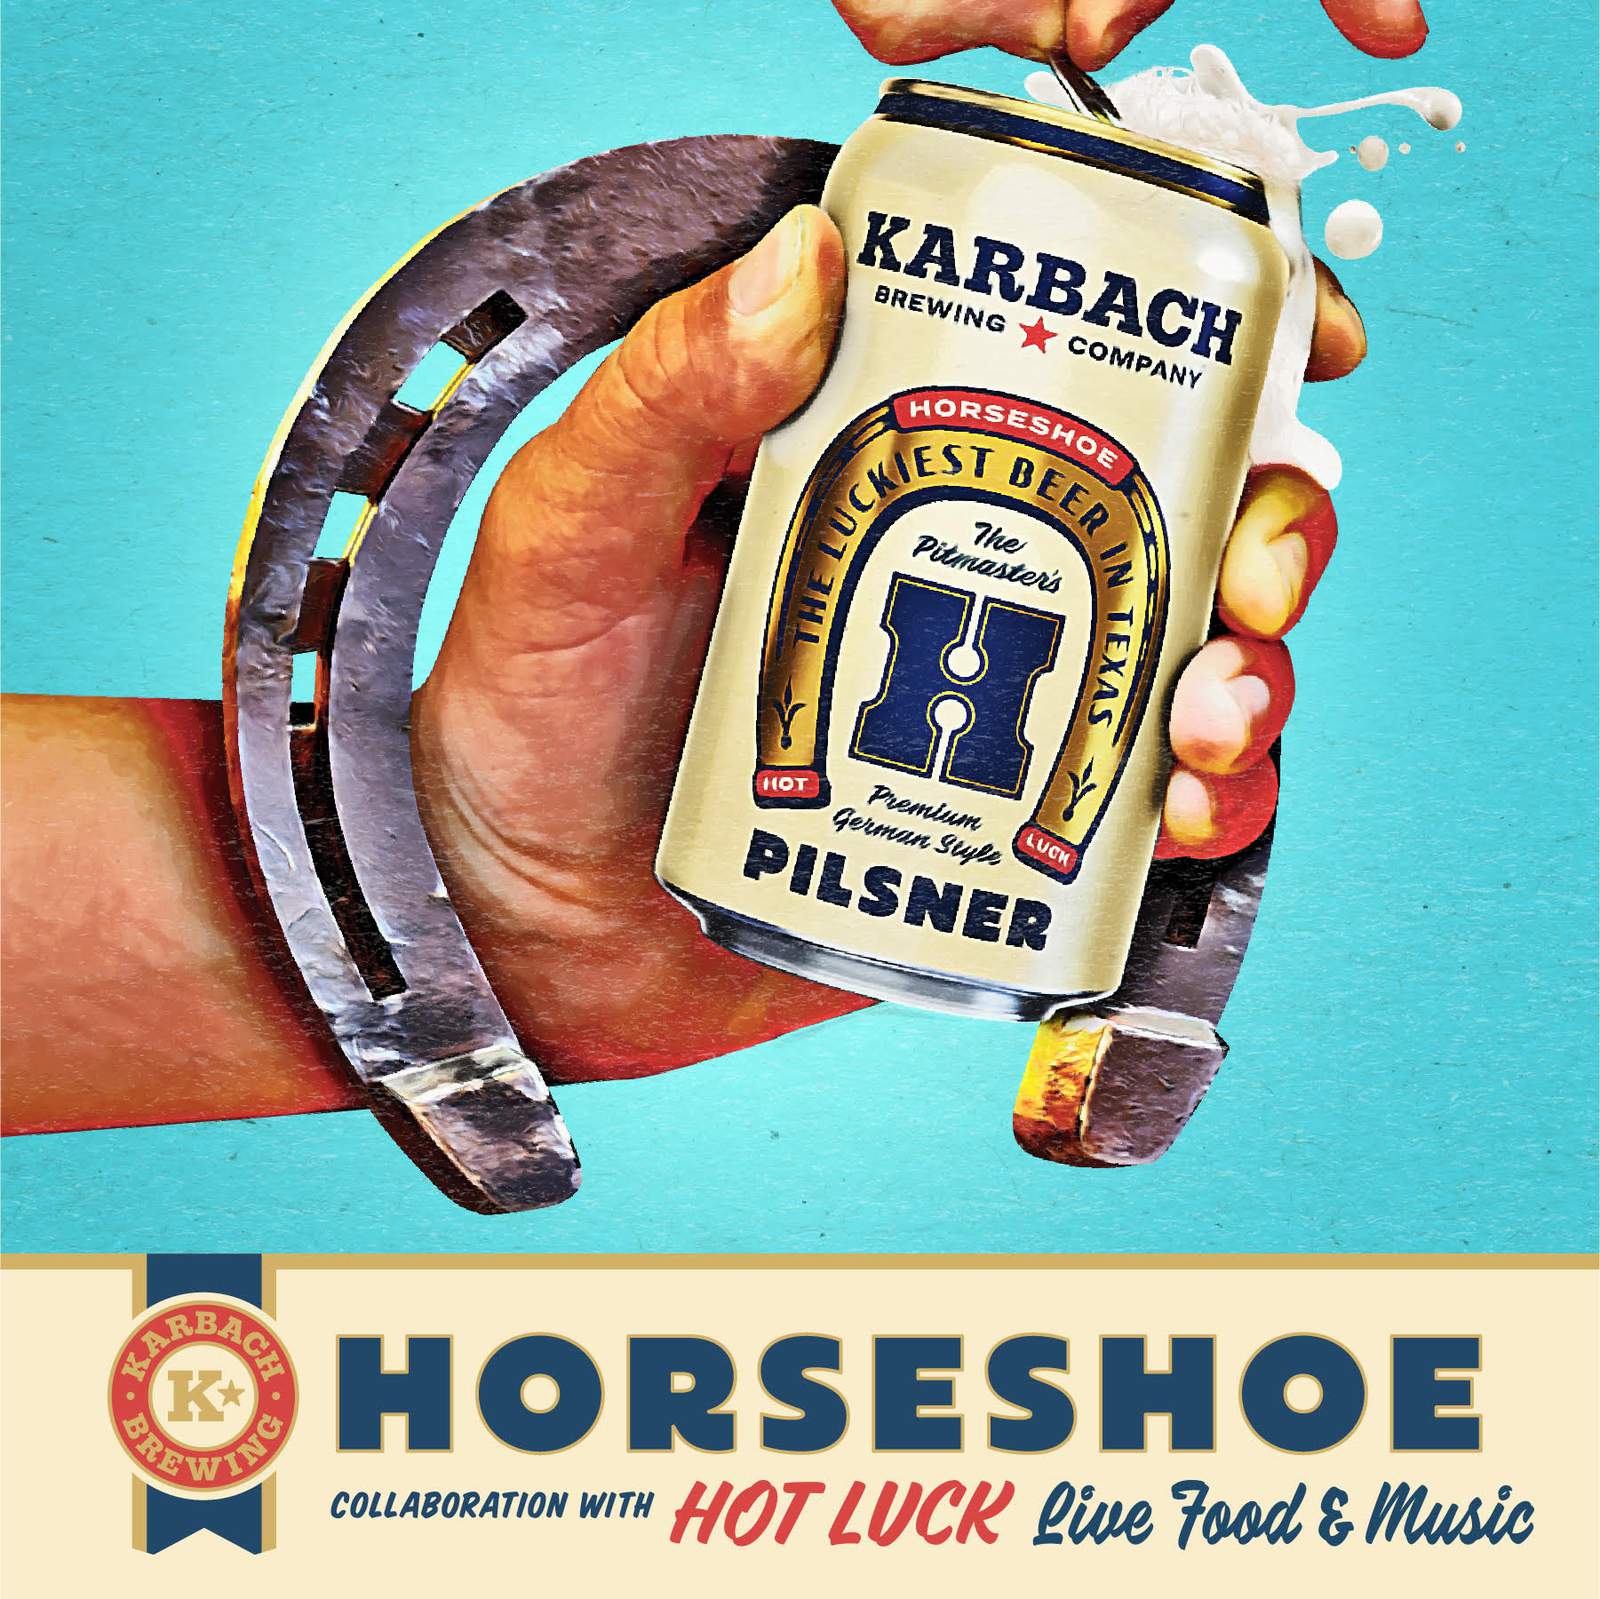 Buy a beer, give back to Houston: Texas chefs brew up Karbach Pilsner to help restaurant workers